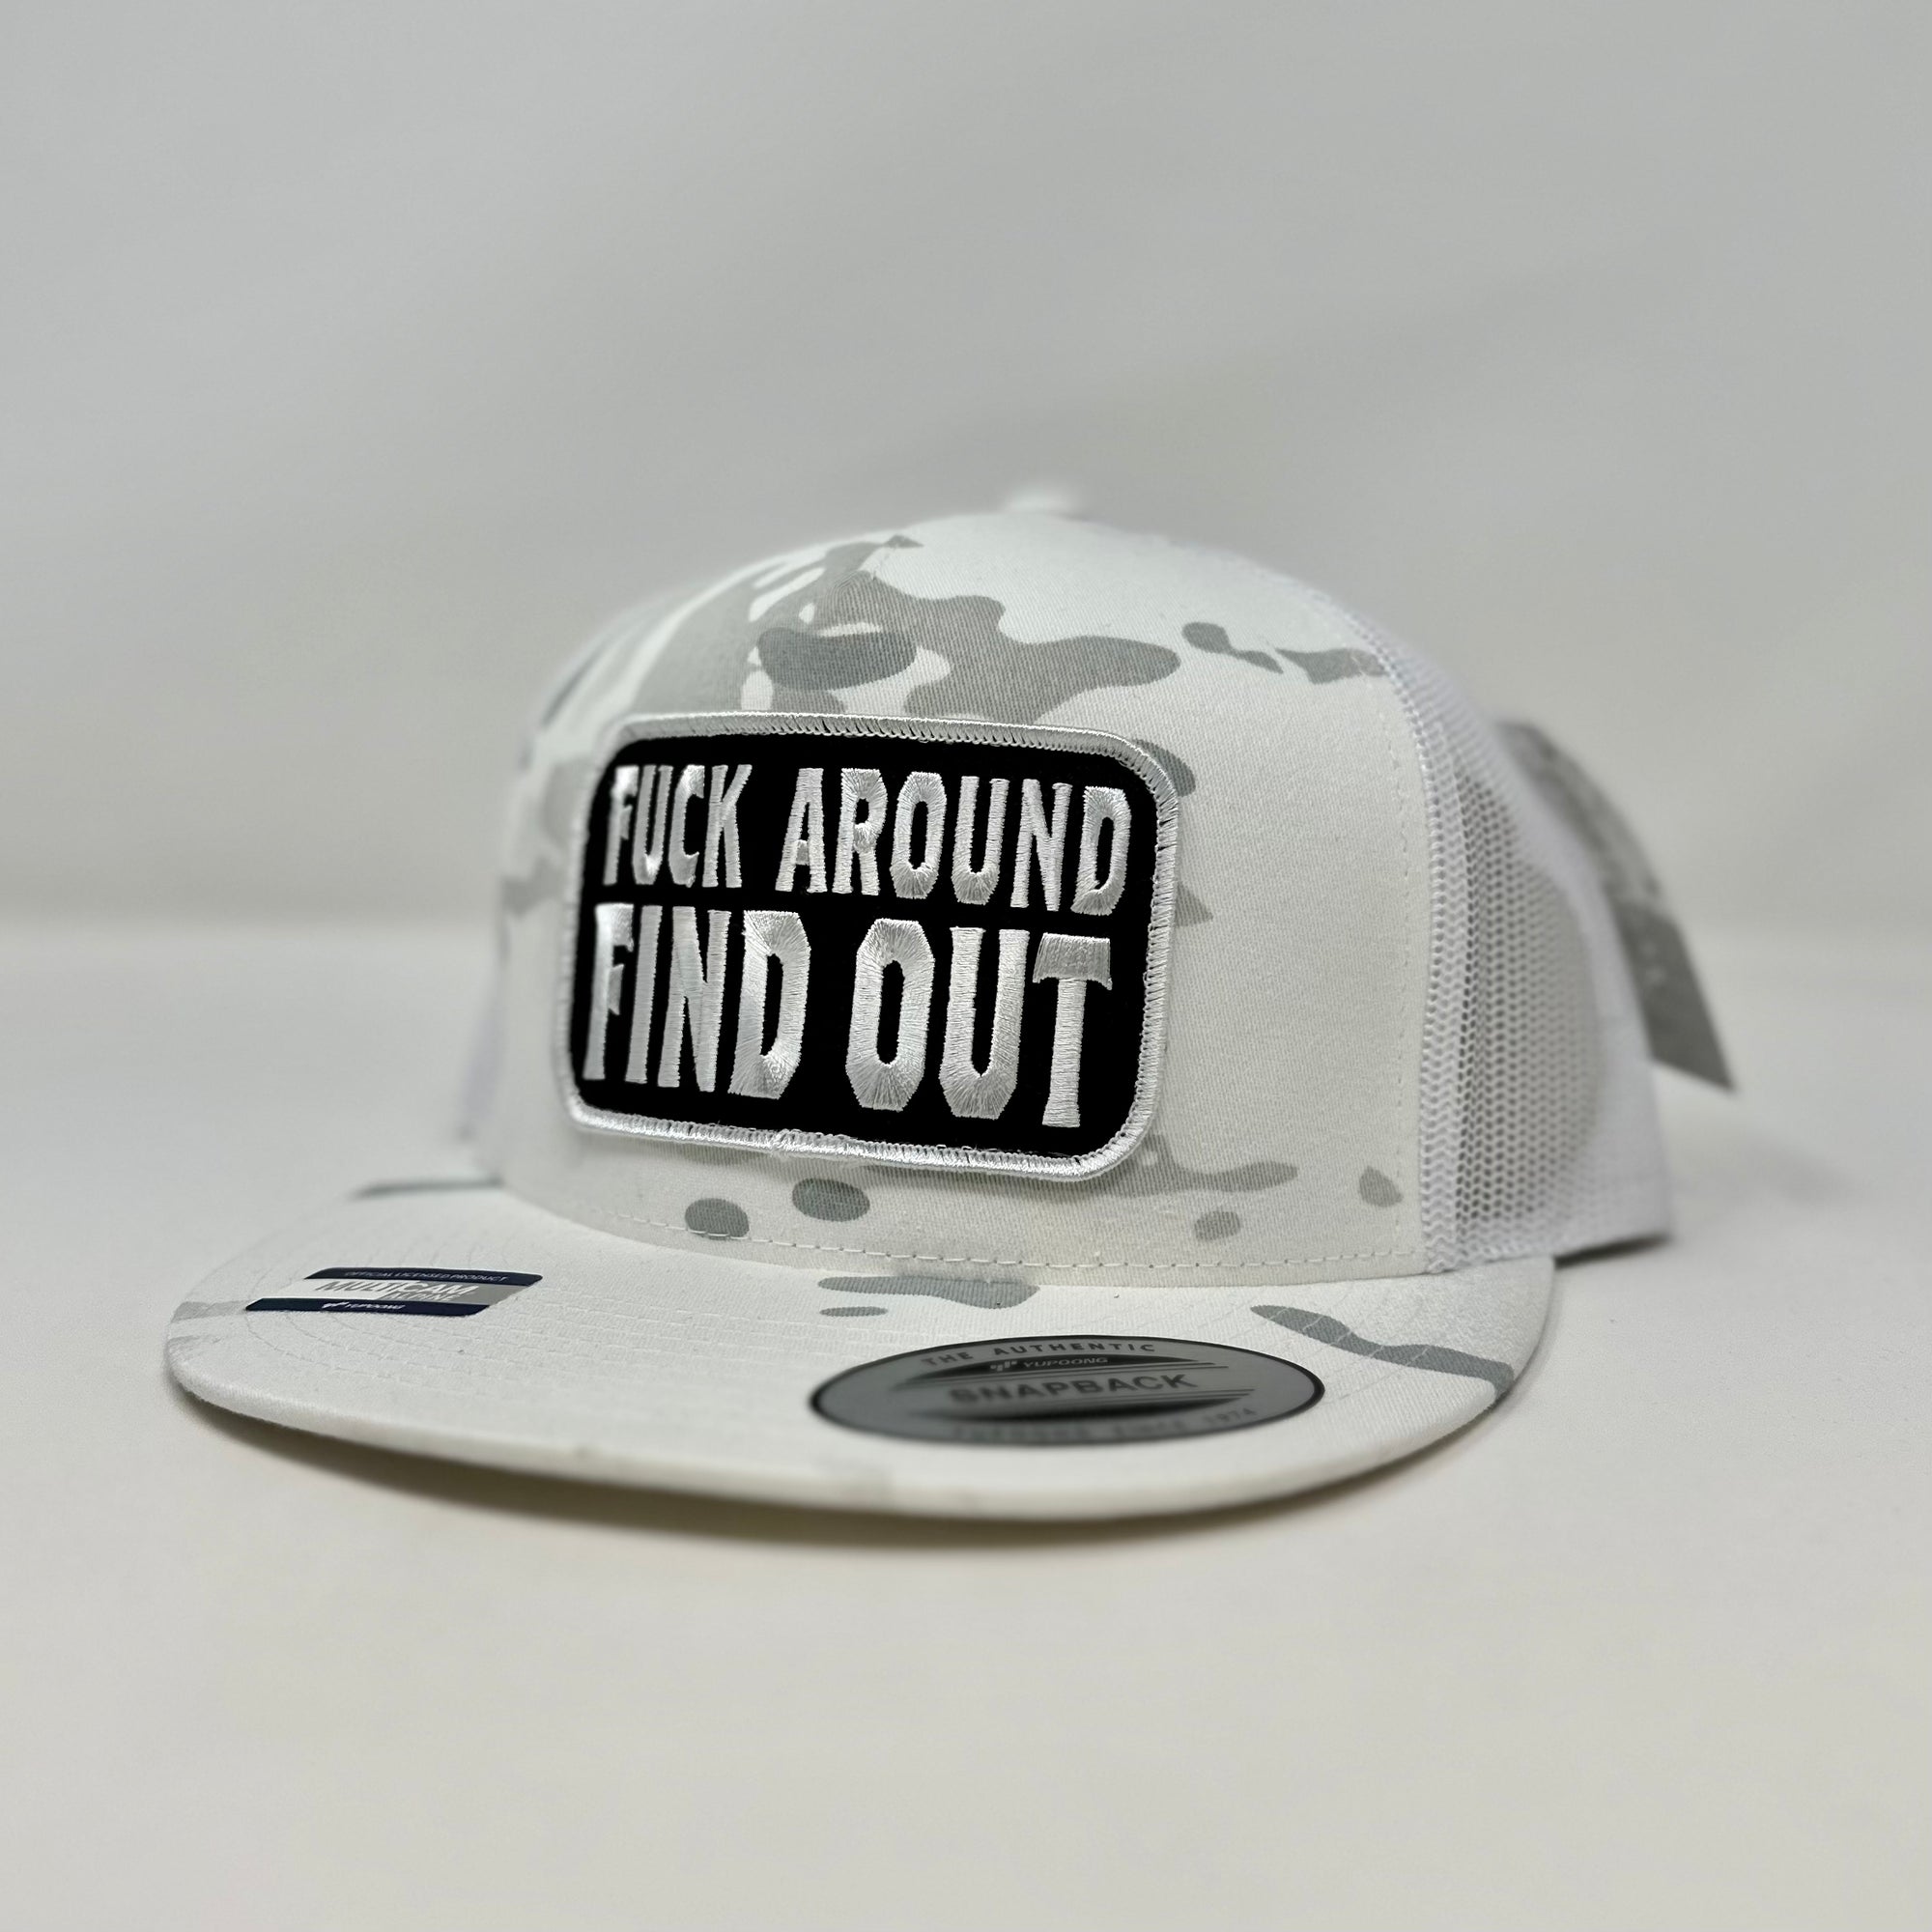 TTC F*ck Around & Find Out - 6006 Multicam White Yupoong SnapBack